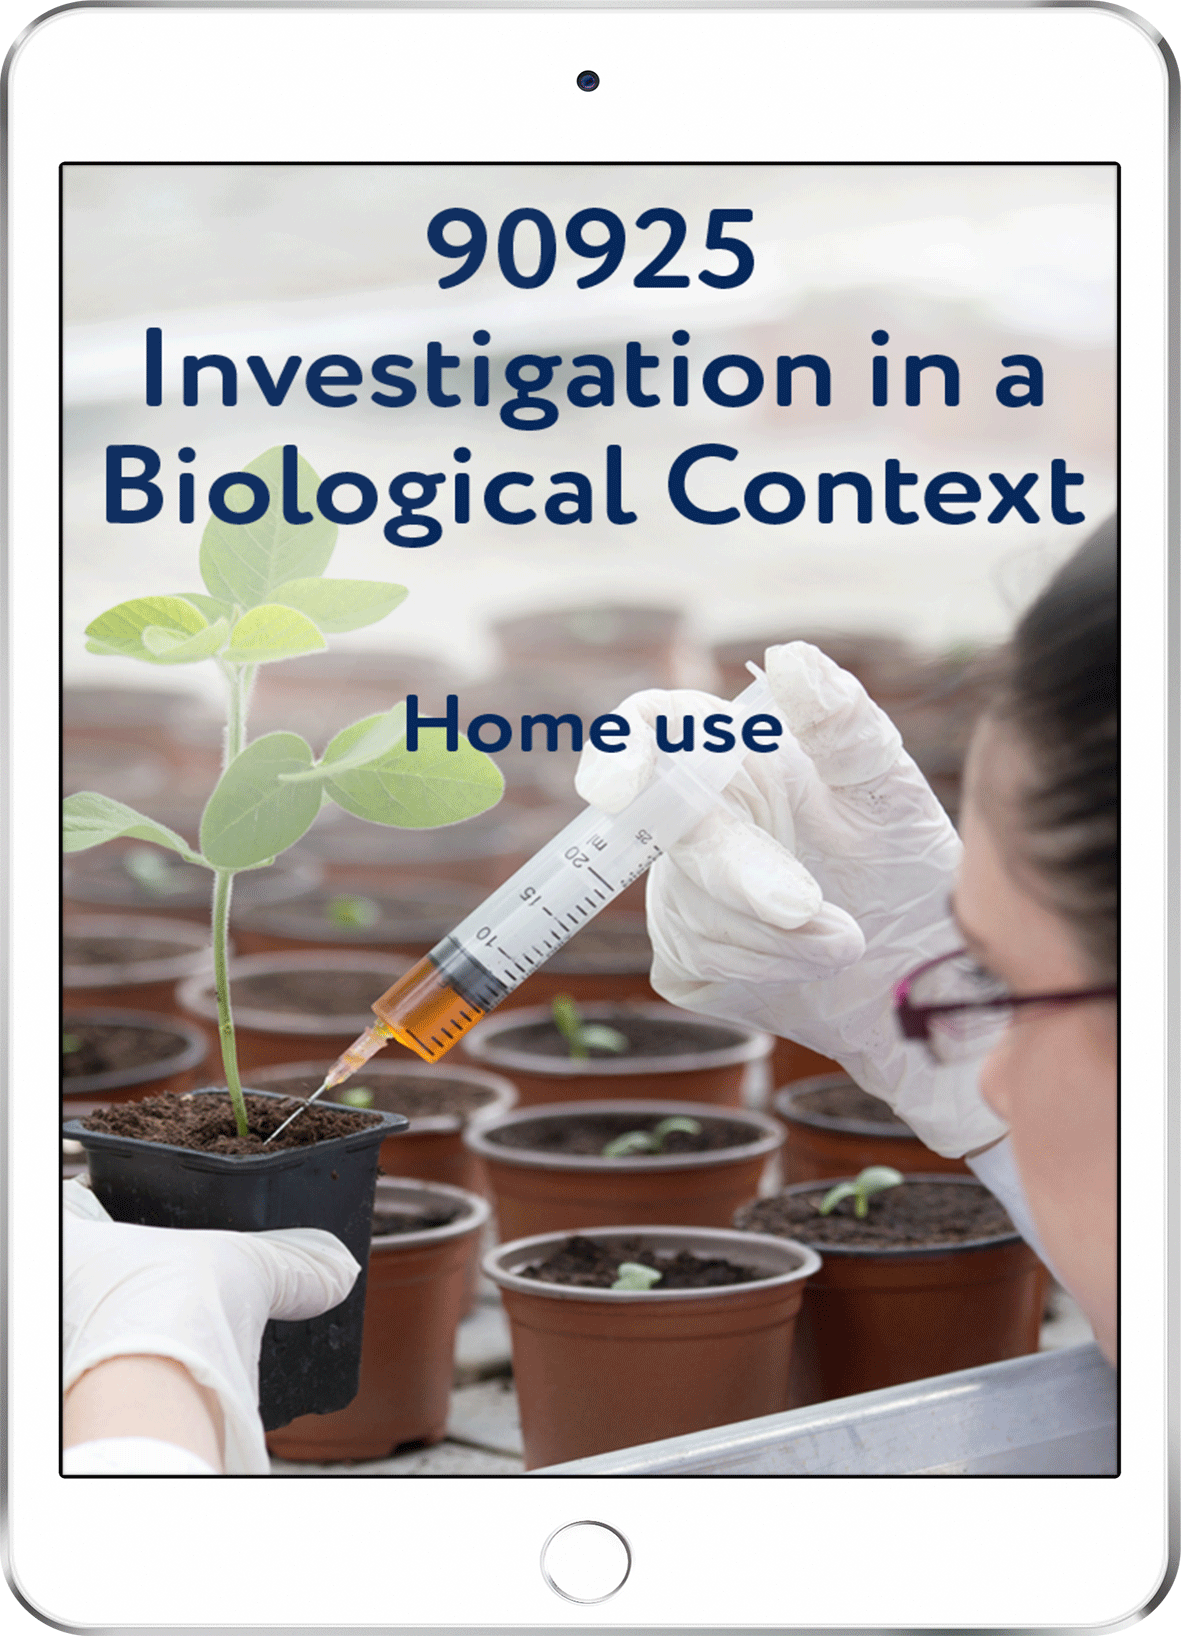 90925 Investigation in a Biological Context - Home Use